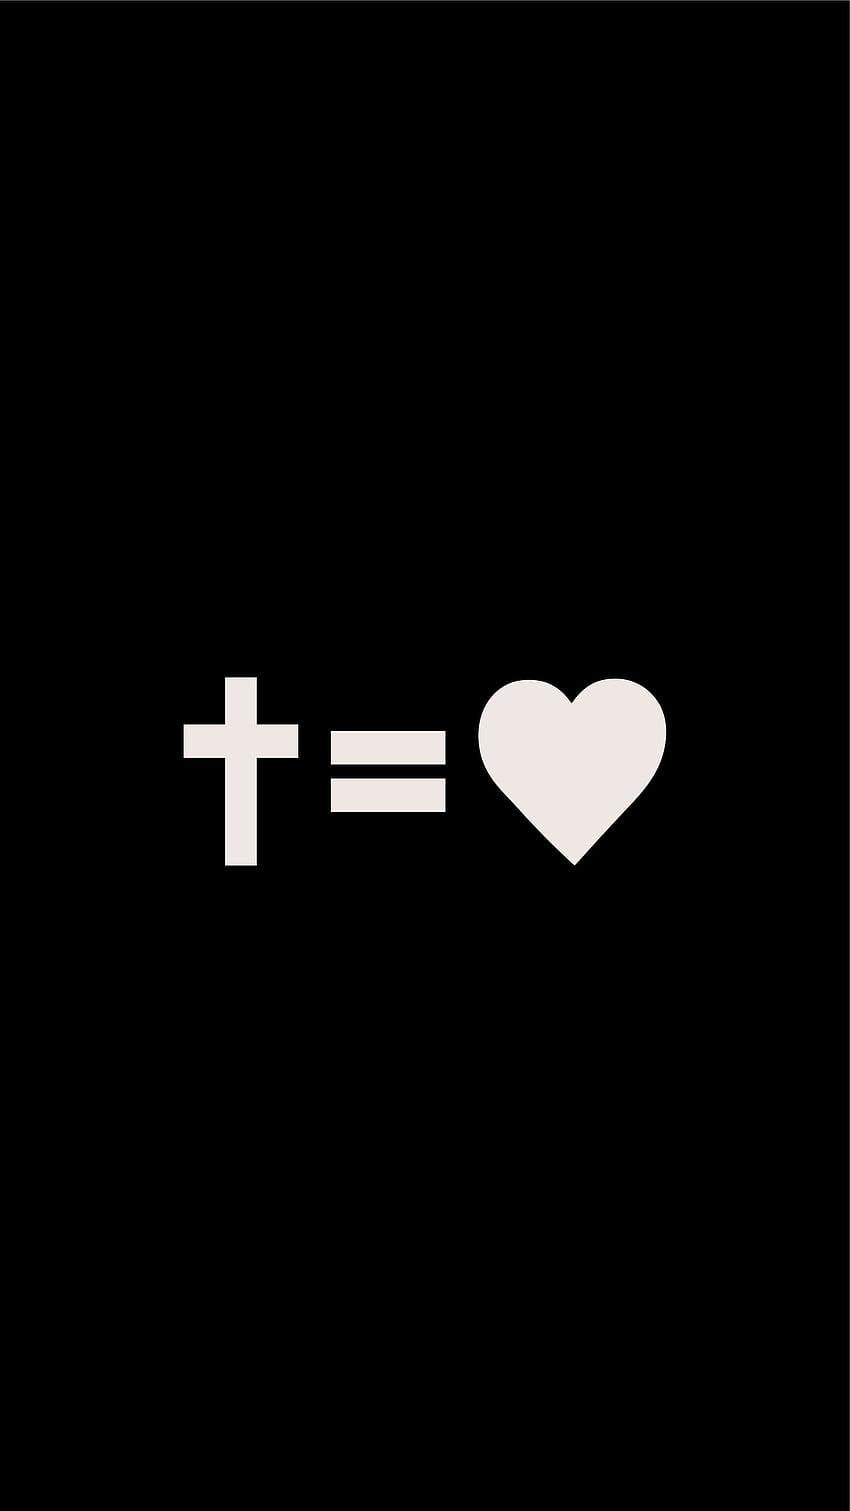 Cross Equals Love - Posters, Invite Cards, Banners, Social Media, Phone & More!, Aesthetic Cross HD phone wallpaper